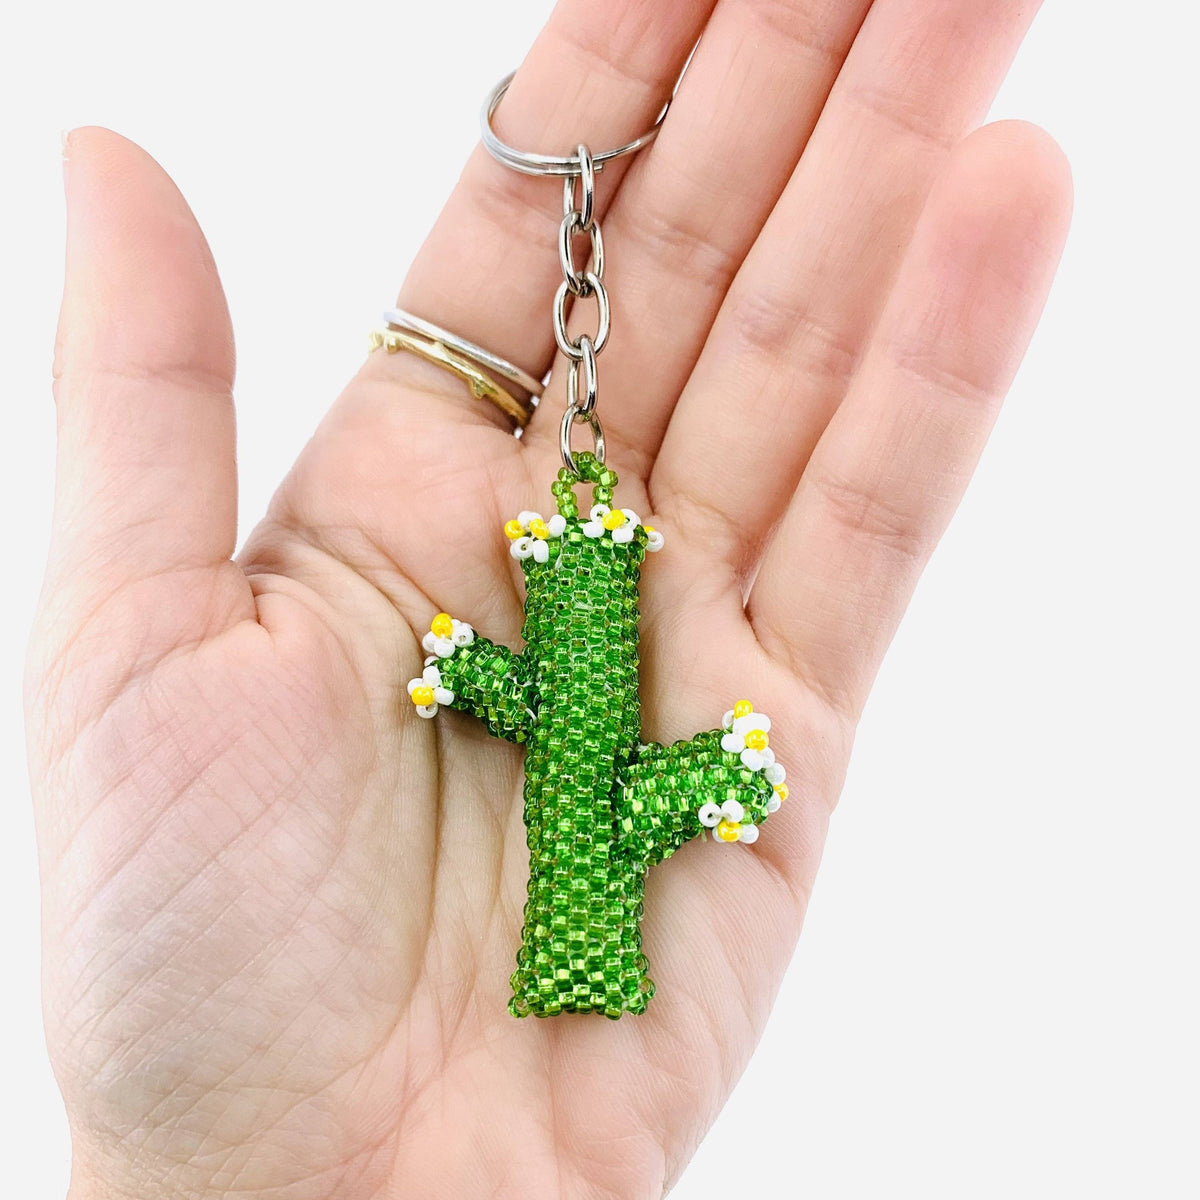 Glass Beaded Key Chain, Cactus Accessory Lumily Golden Torch 